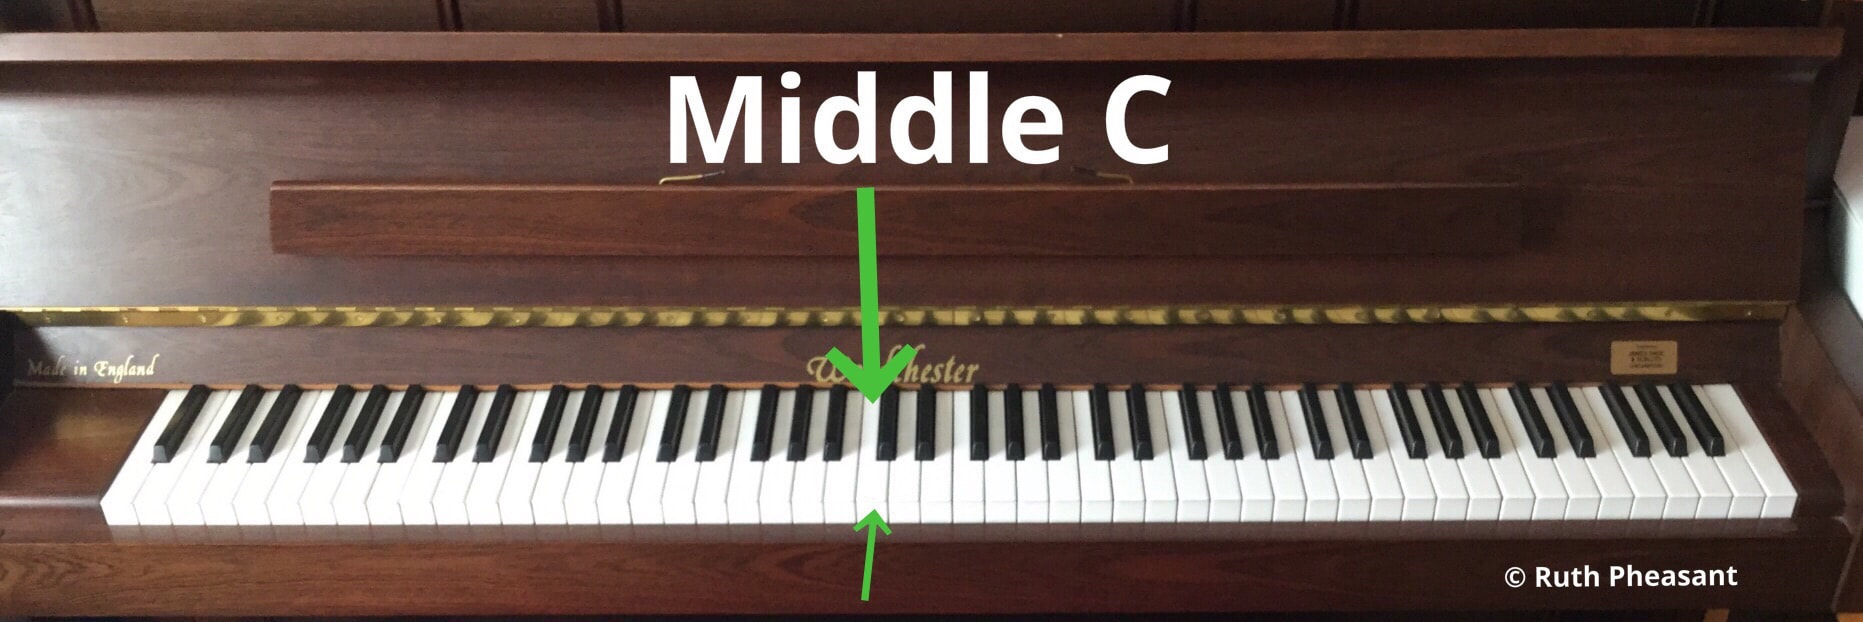 on piano middle c sound